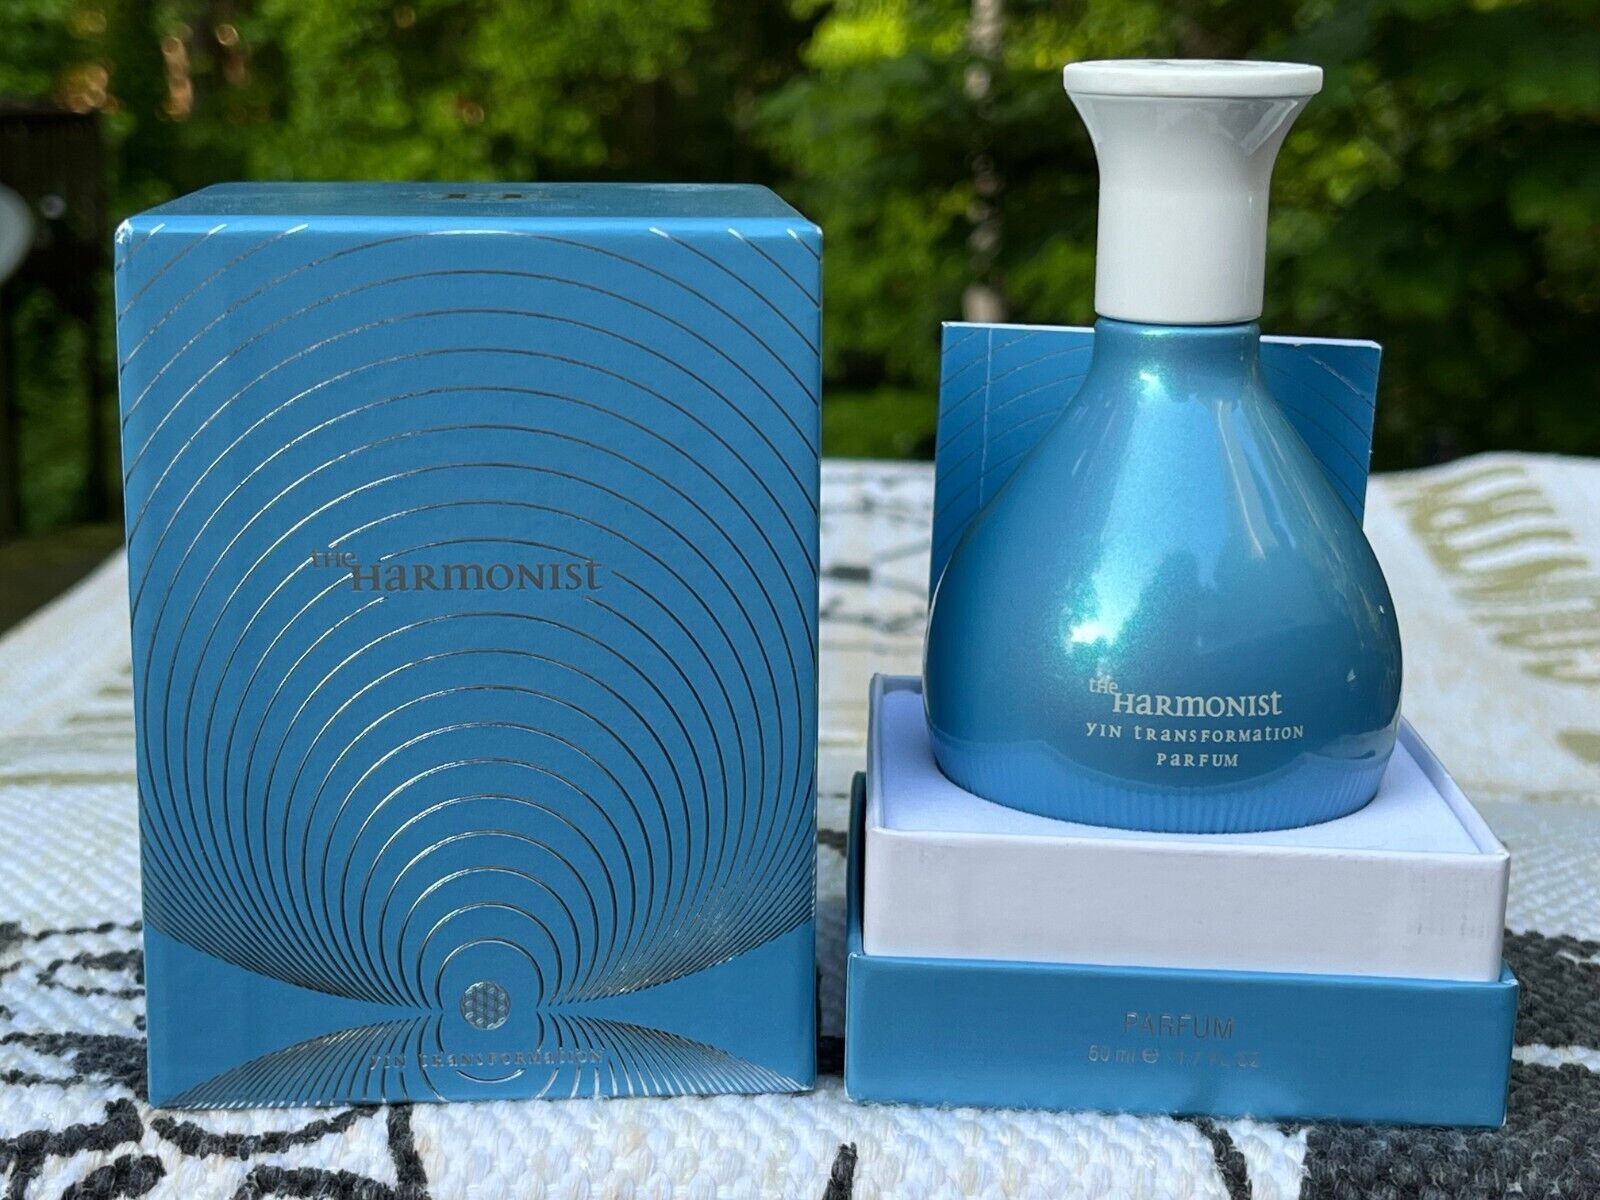 **EMPTY** The Harmonist YIN TRANSFORMATION PARFUM 50ml - Collectible/Refillable